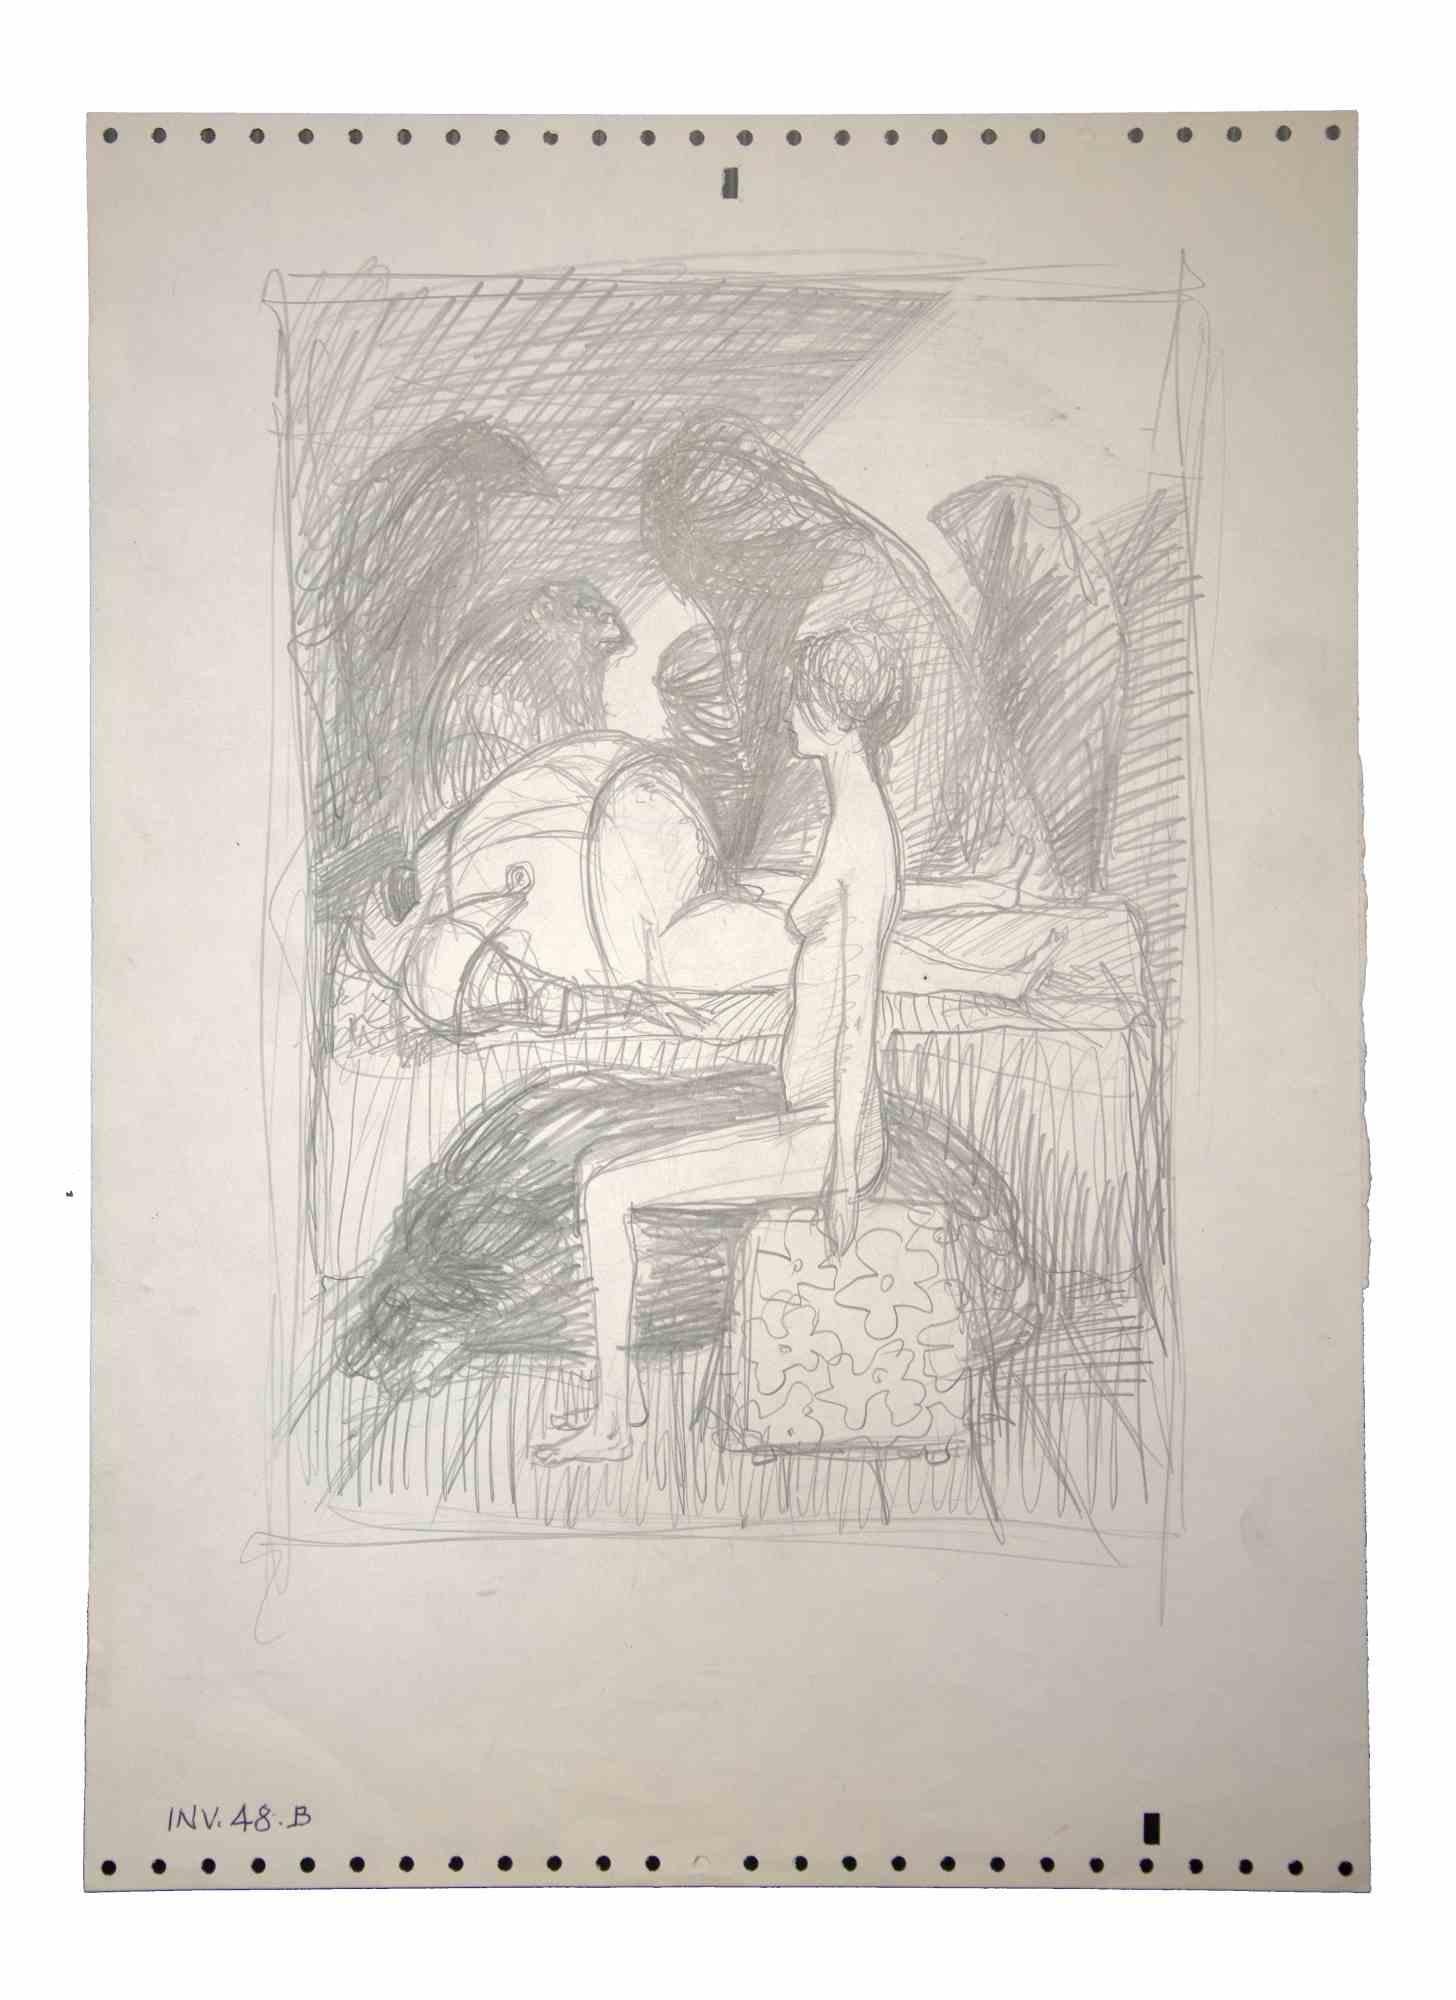 Female Figure is an original artwork realized in the 1970s by the Italian Contemporary artist  Leo Guida  (1992 - 2017).

Original drawings in pencil on paper.

Good conditions but aged.

The artwork is depicted through strong strokes in